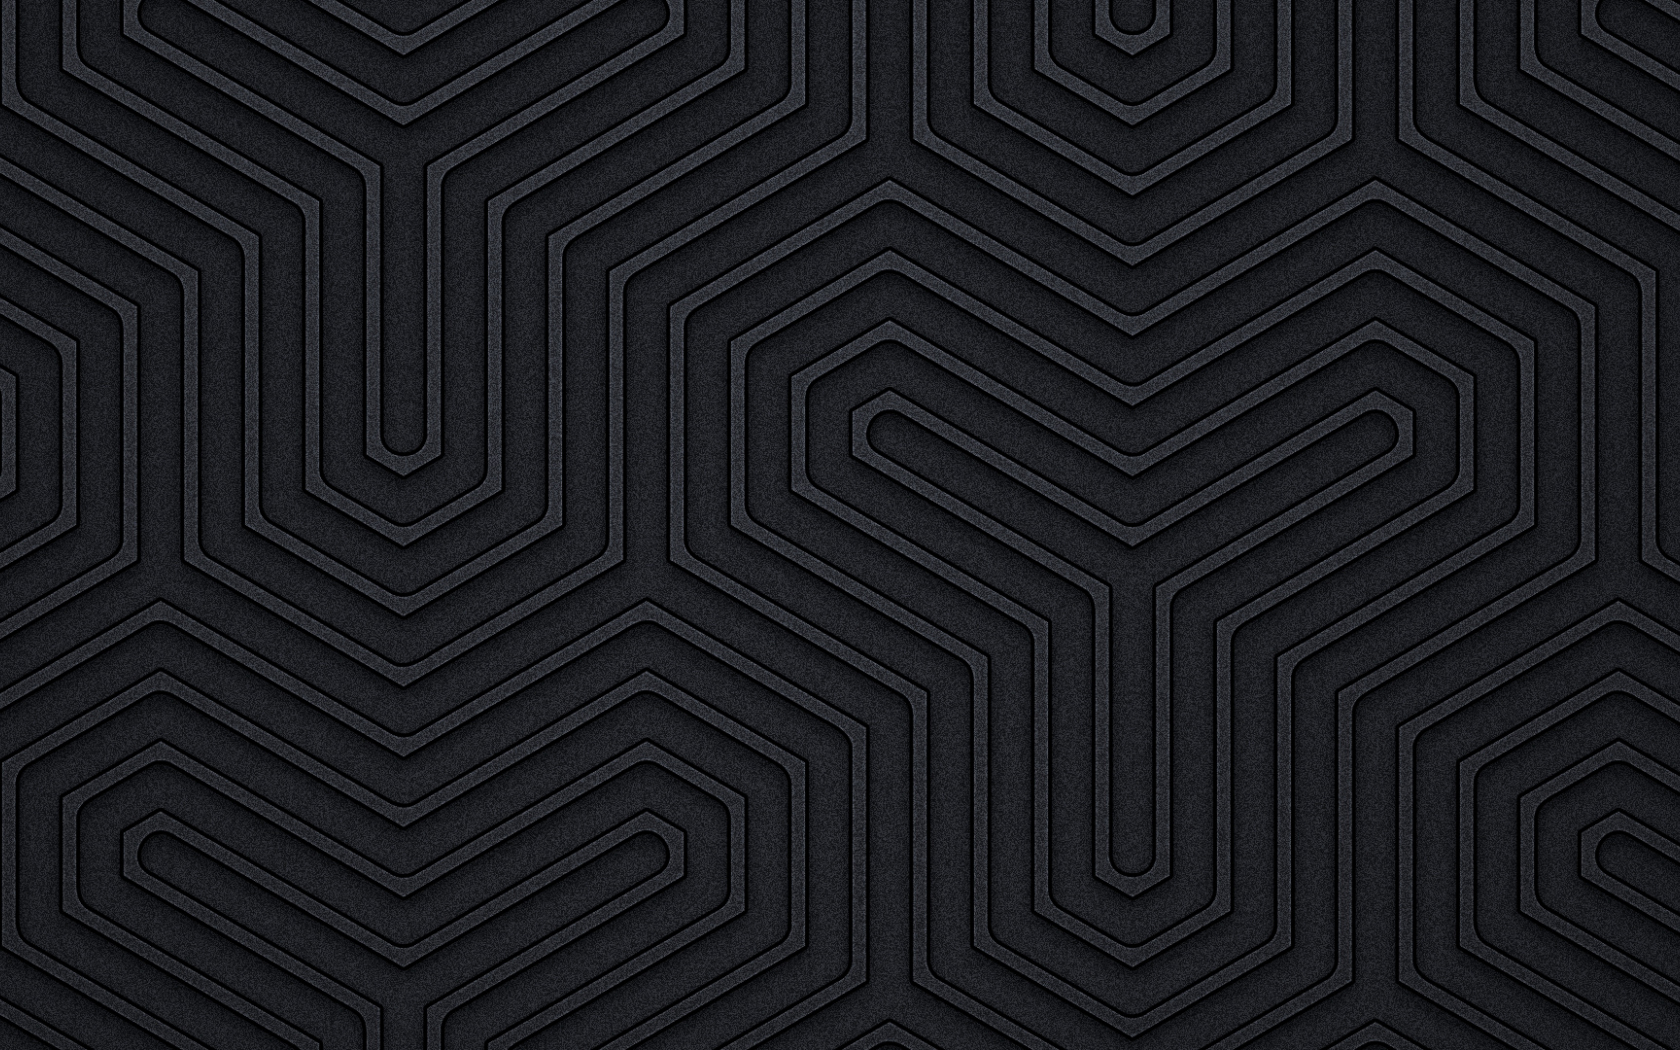 Download wallpaper 1680x1050 black design, pattern, abstract, 16:10 ...